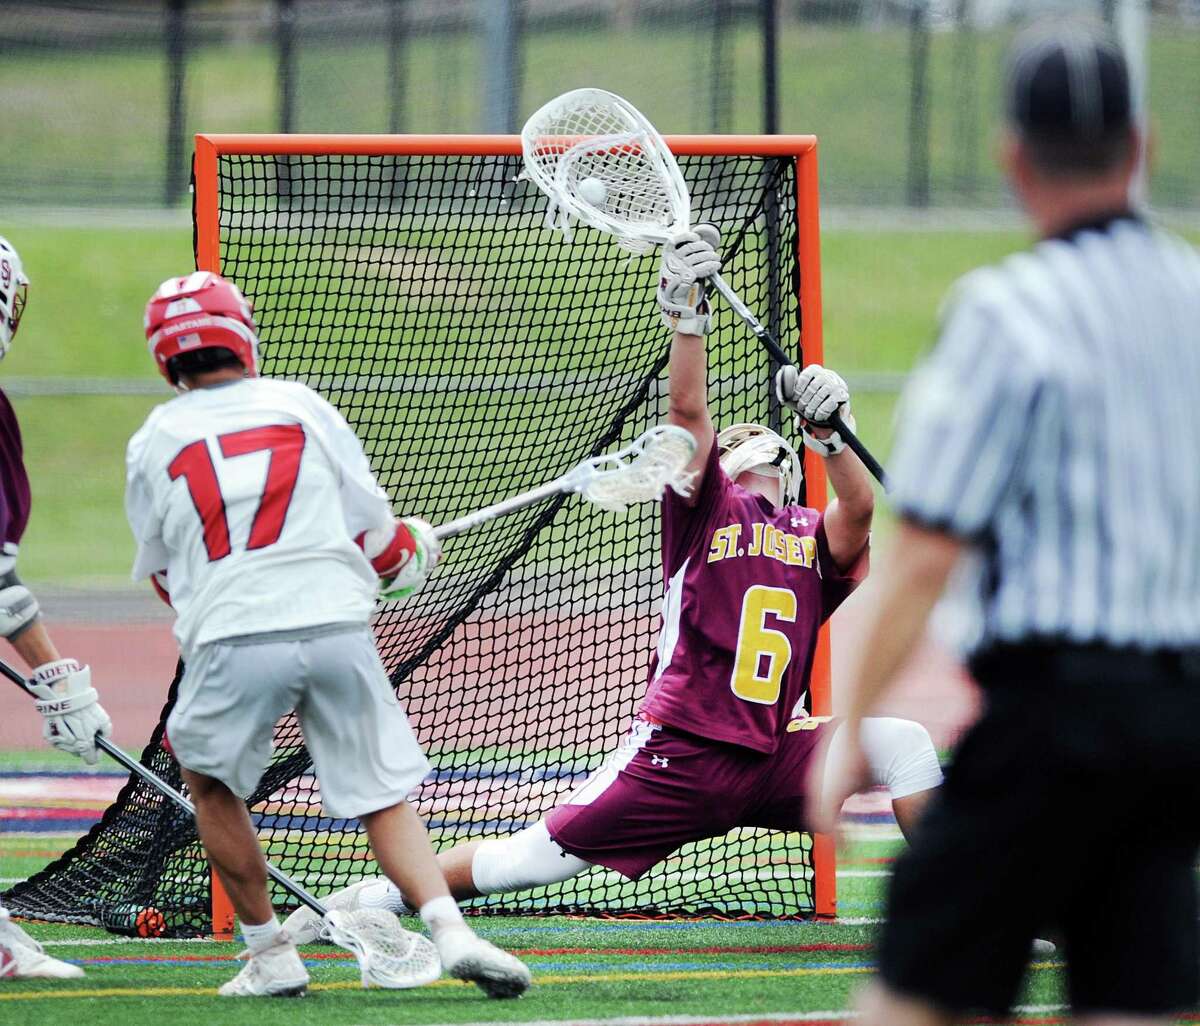 St. Joe's goalie Kyle Burbank (#6) stops a point-blank shot by Dante Giachello (#17) of Somers during the boys high school lacrosse Class S title game between St. Joseph High School and Somers High School at Brien McMahon High School in Norwalk, Conn., Saturday, June 9, 2018. St. Joe's captured the titled beating Somers 11-6, winning their 5th state title in 10 years.